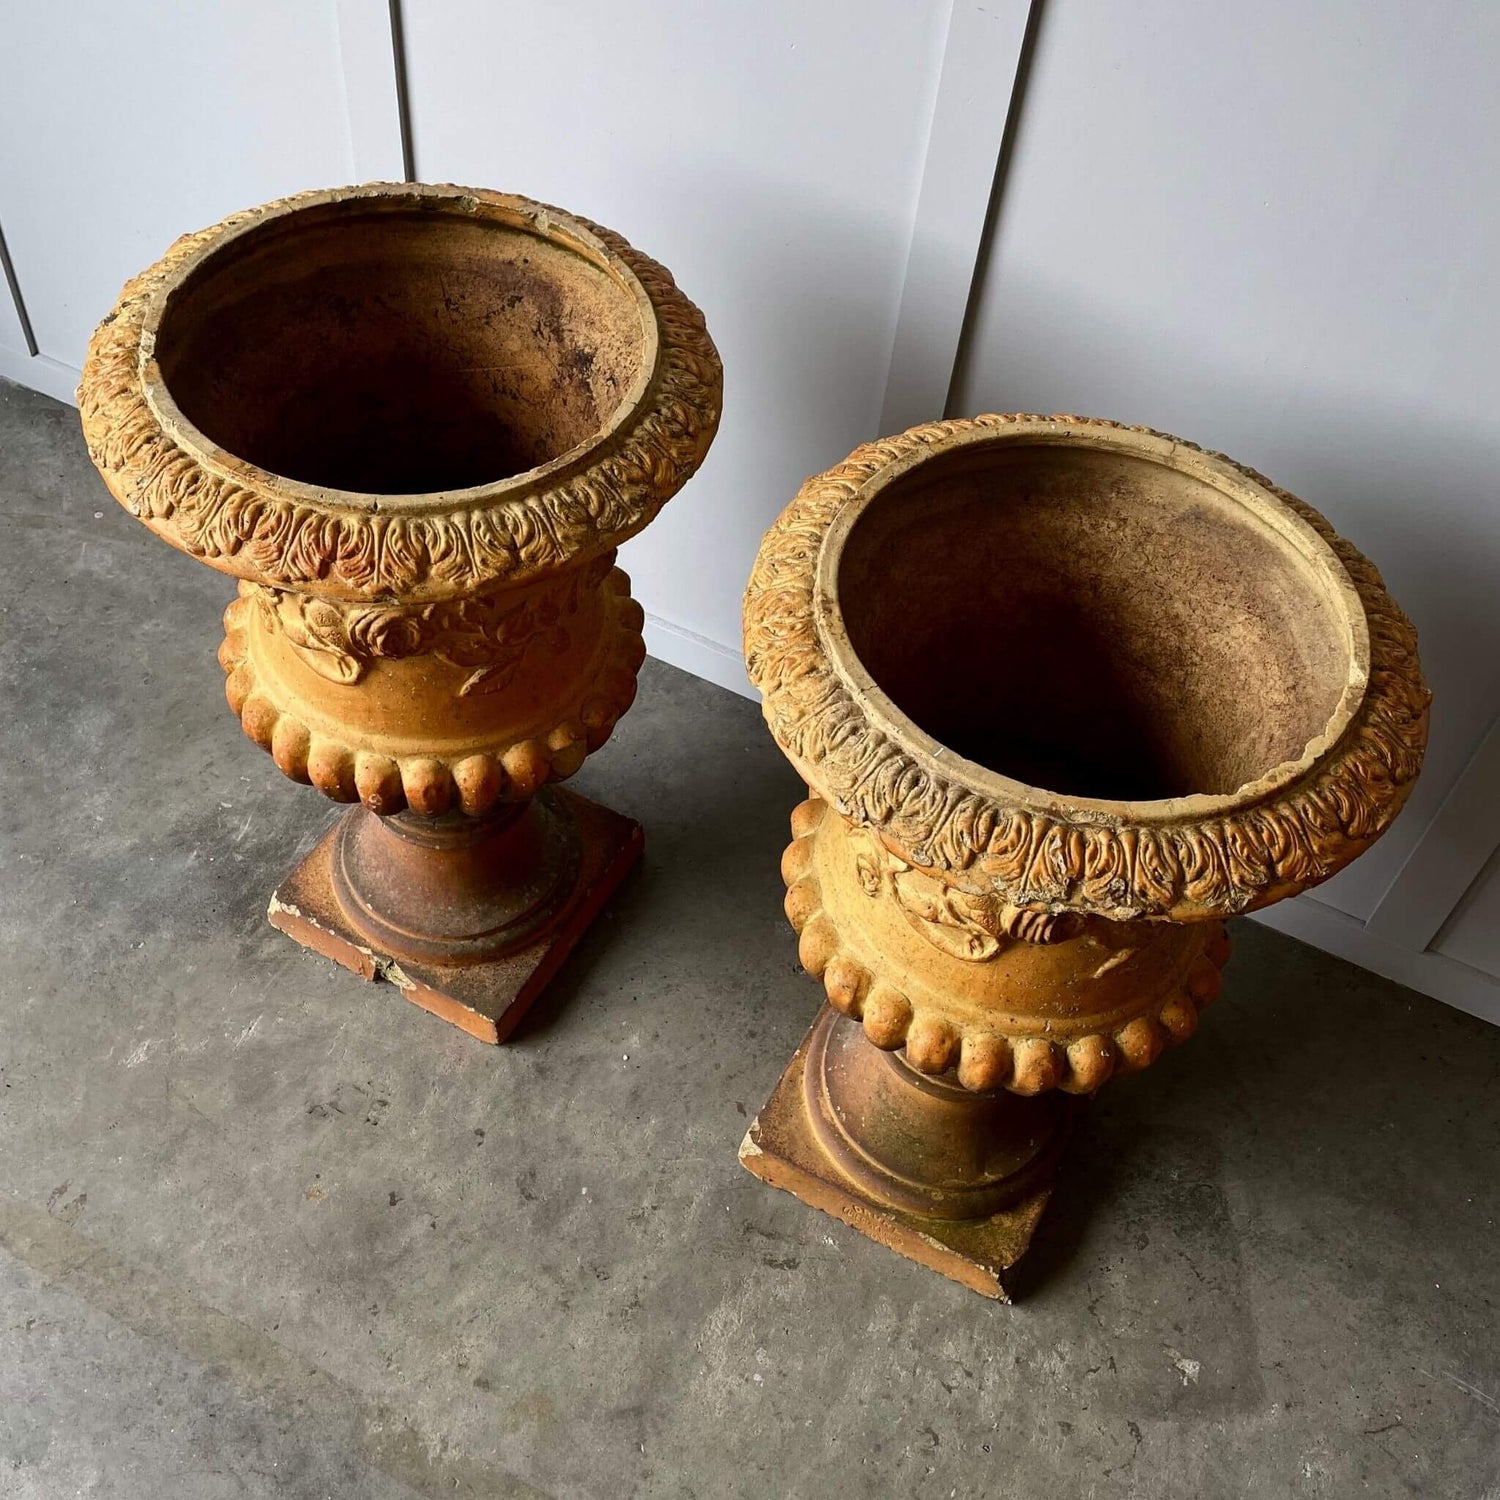 Top of antique pottery urns